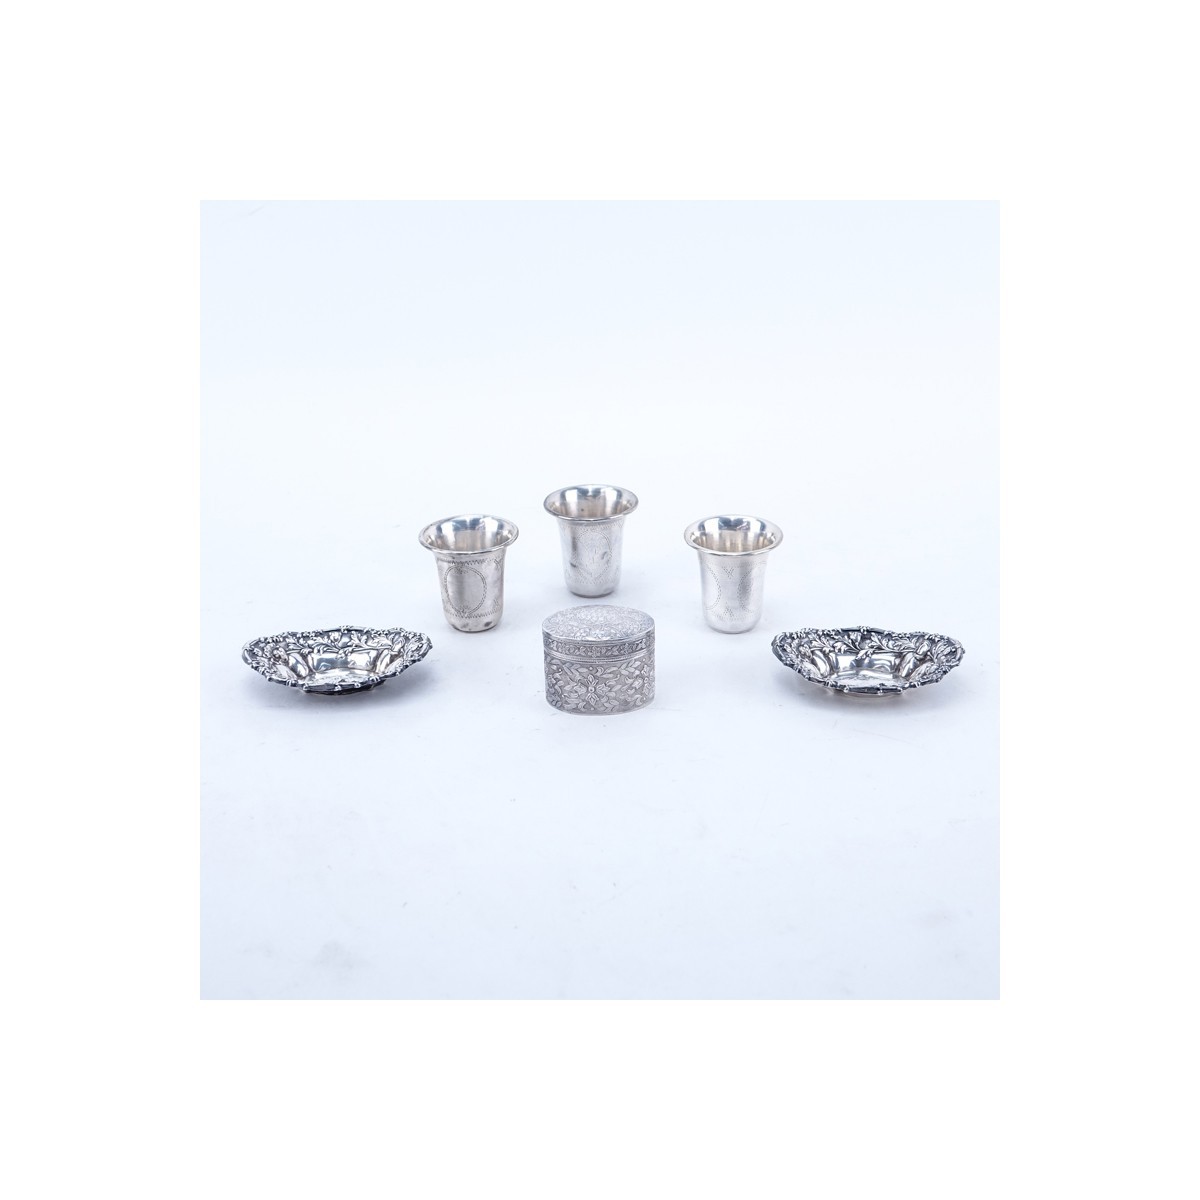 Group of Six (6): Three Sterling Silver Kiddush 2-1/4" H, Two Repousse Sterling Silver Nut Dishes 4" W, and 800 Silver Repousse Covered Box 2" H. All appropriately stamped.